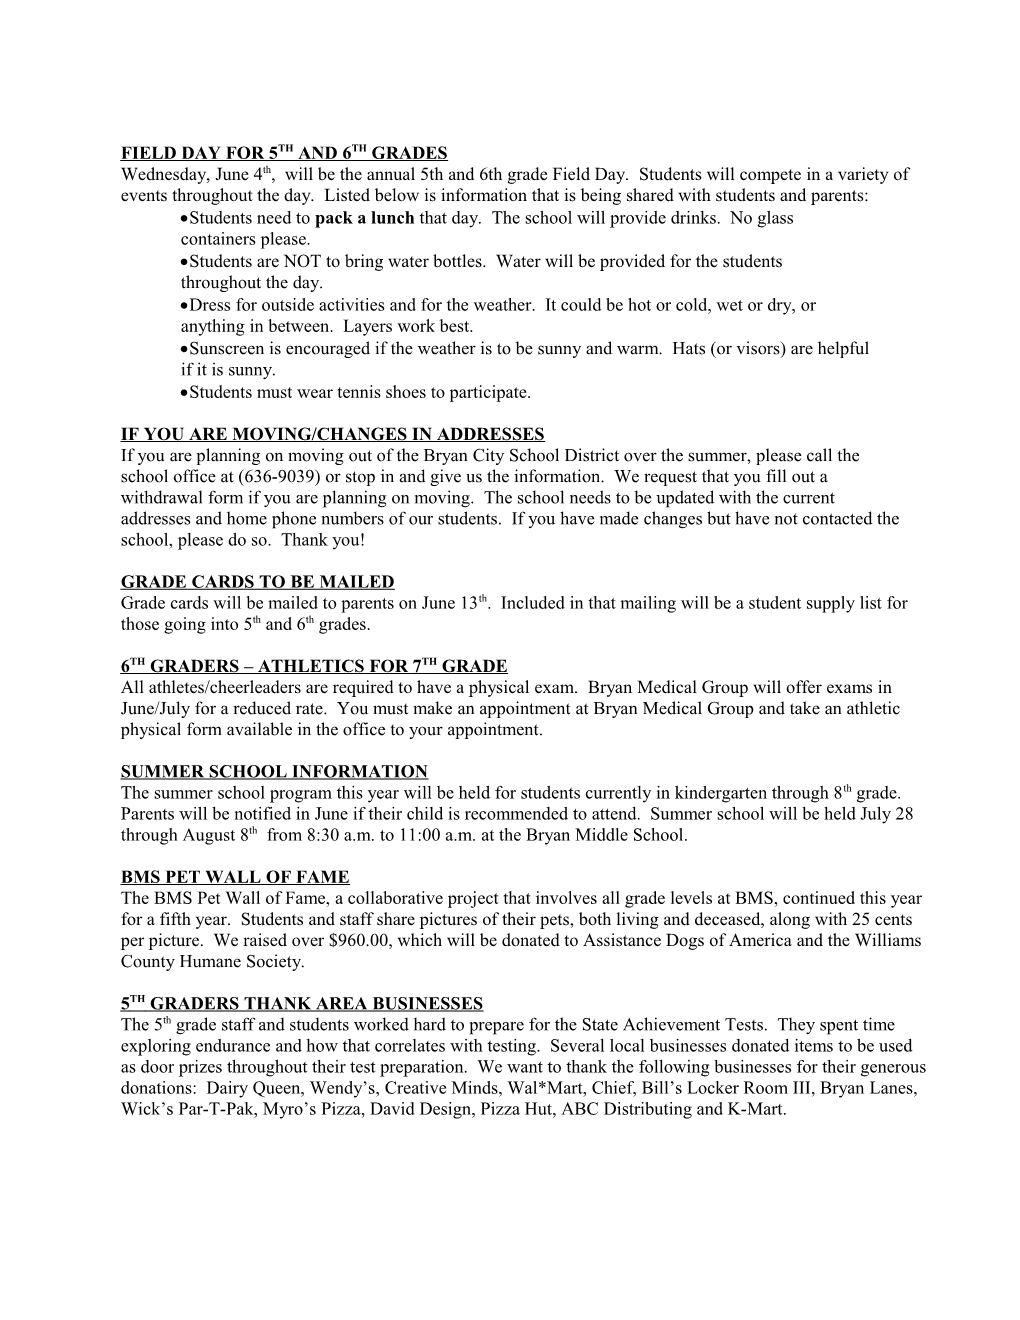 No. 5 GRADES 4, 5 and 6 NEWSLETTER May 23, 2008